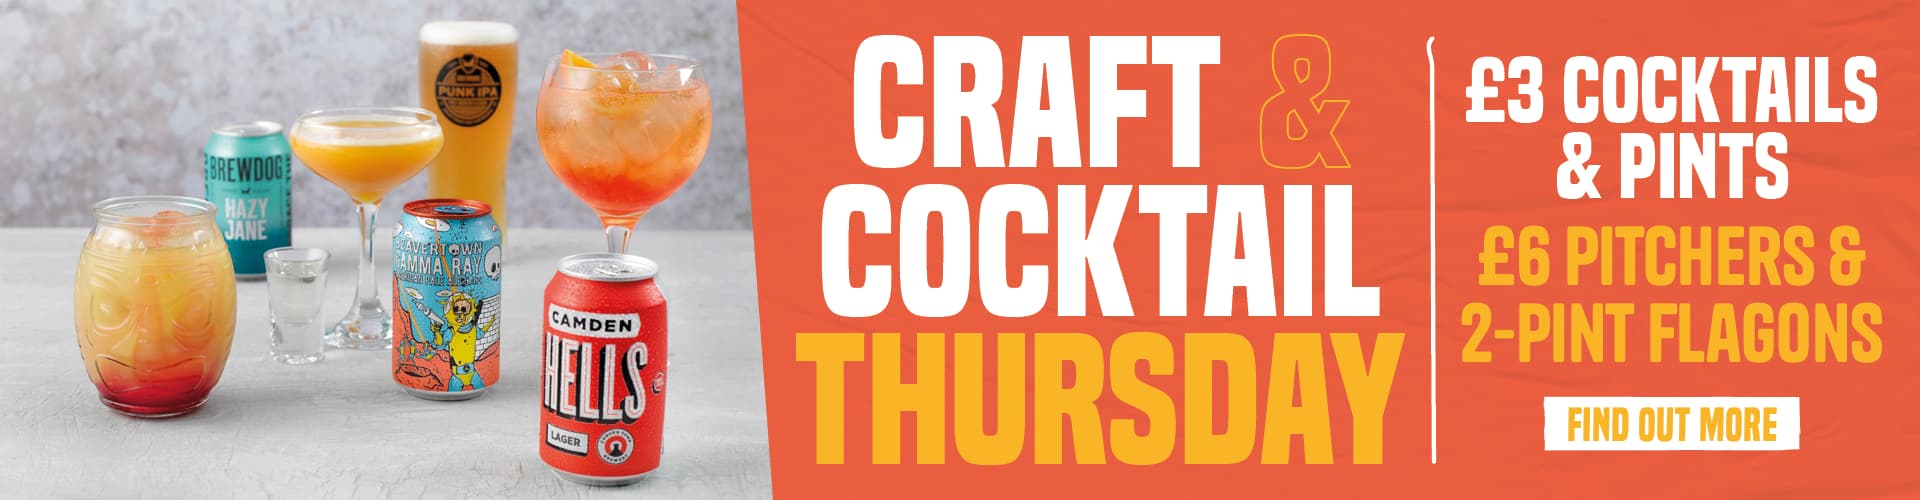 Craft & Cocktail Thursday - Find Out More